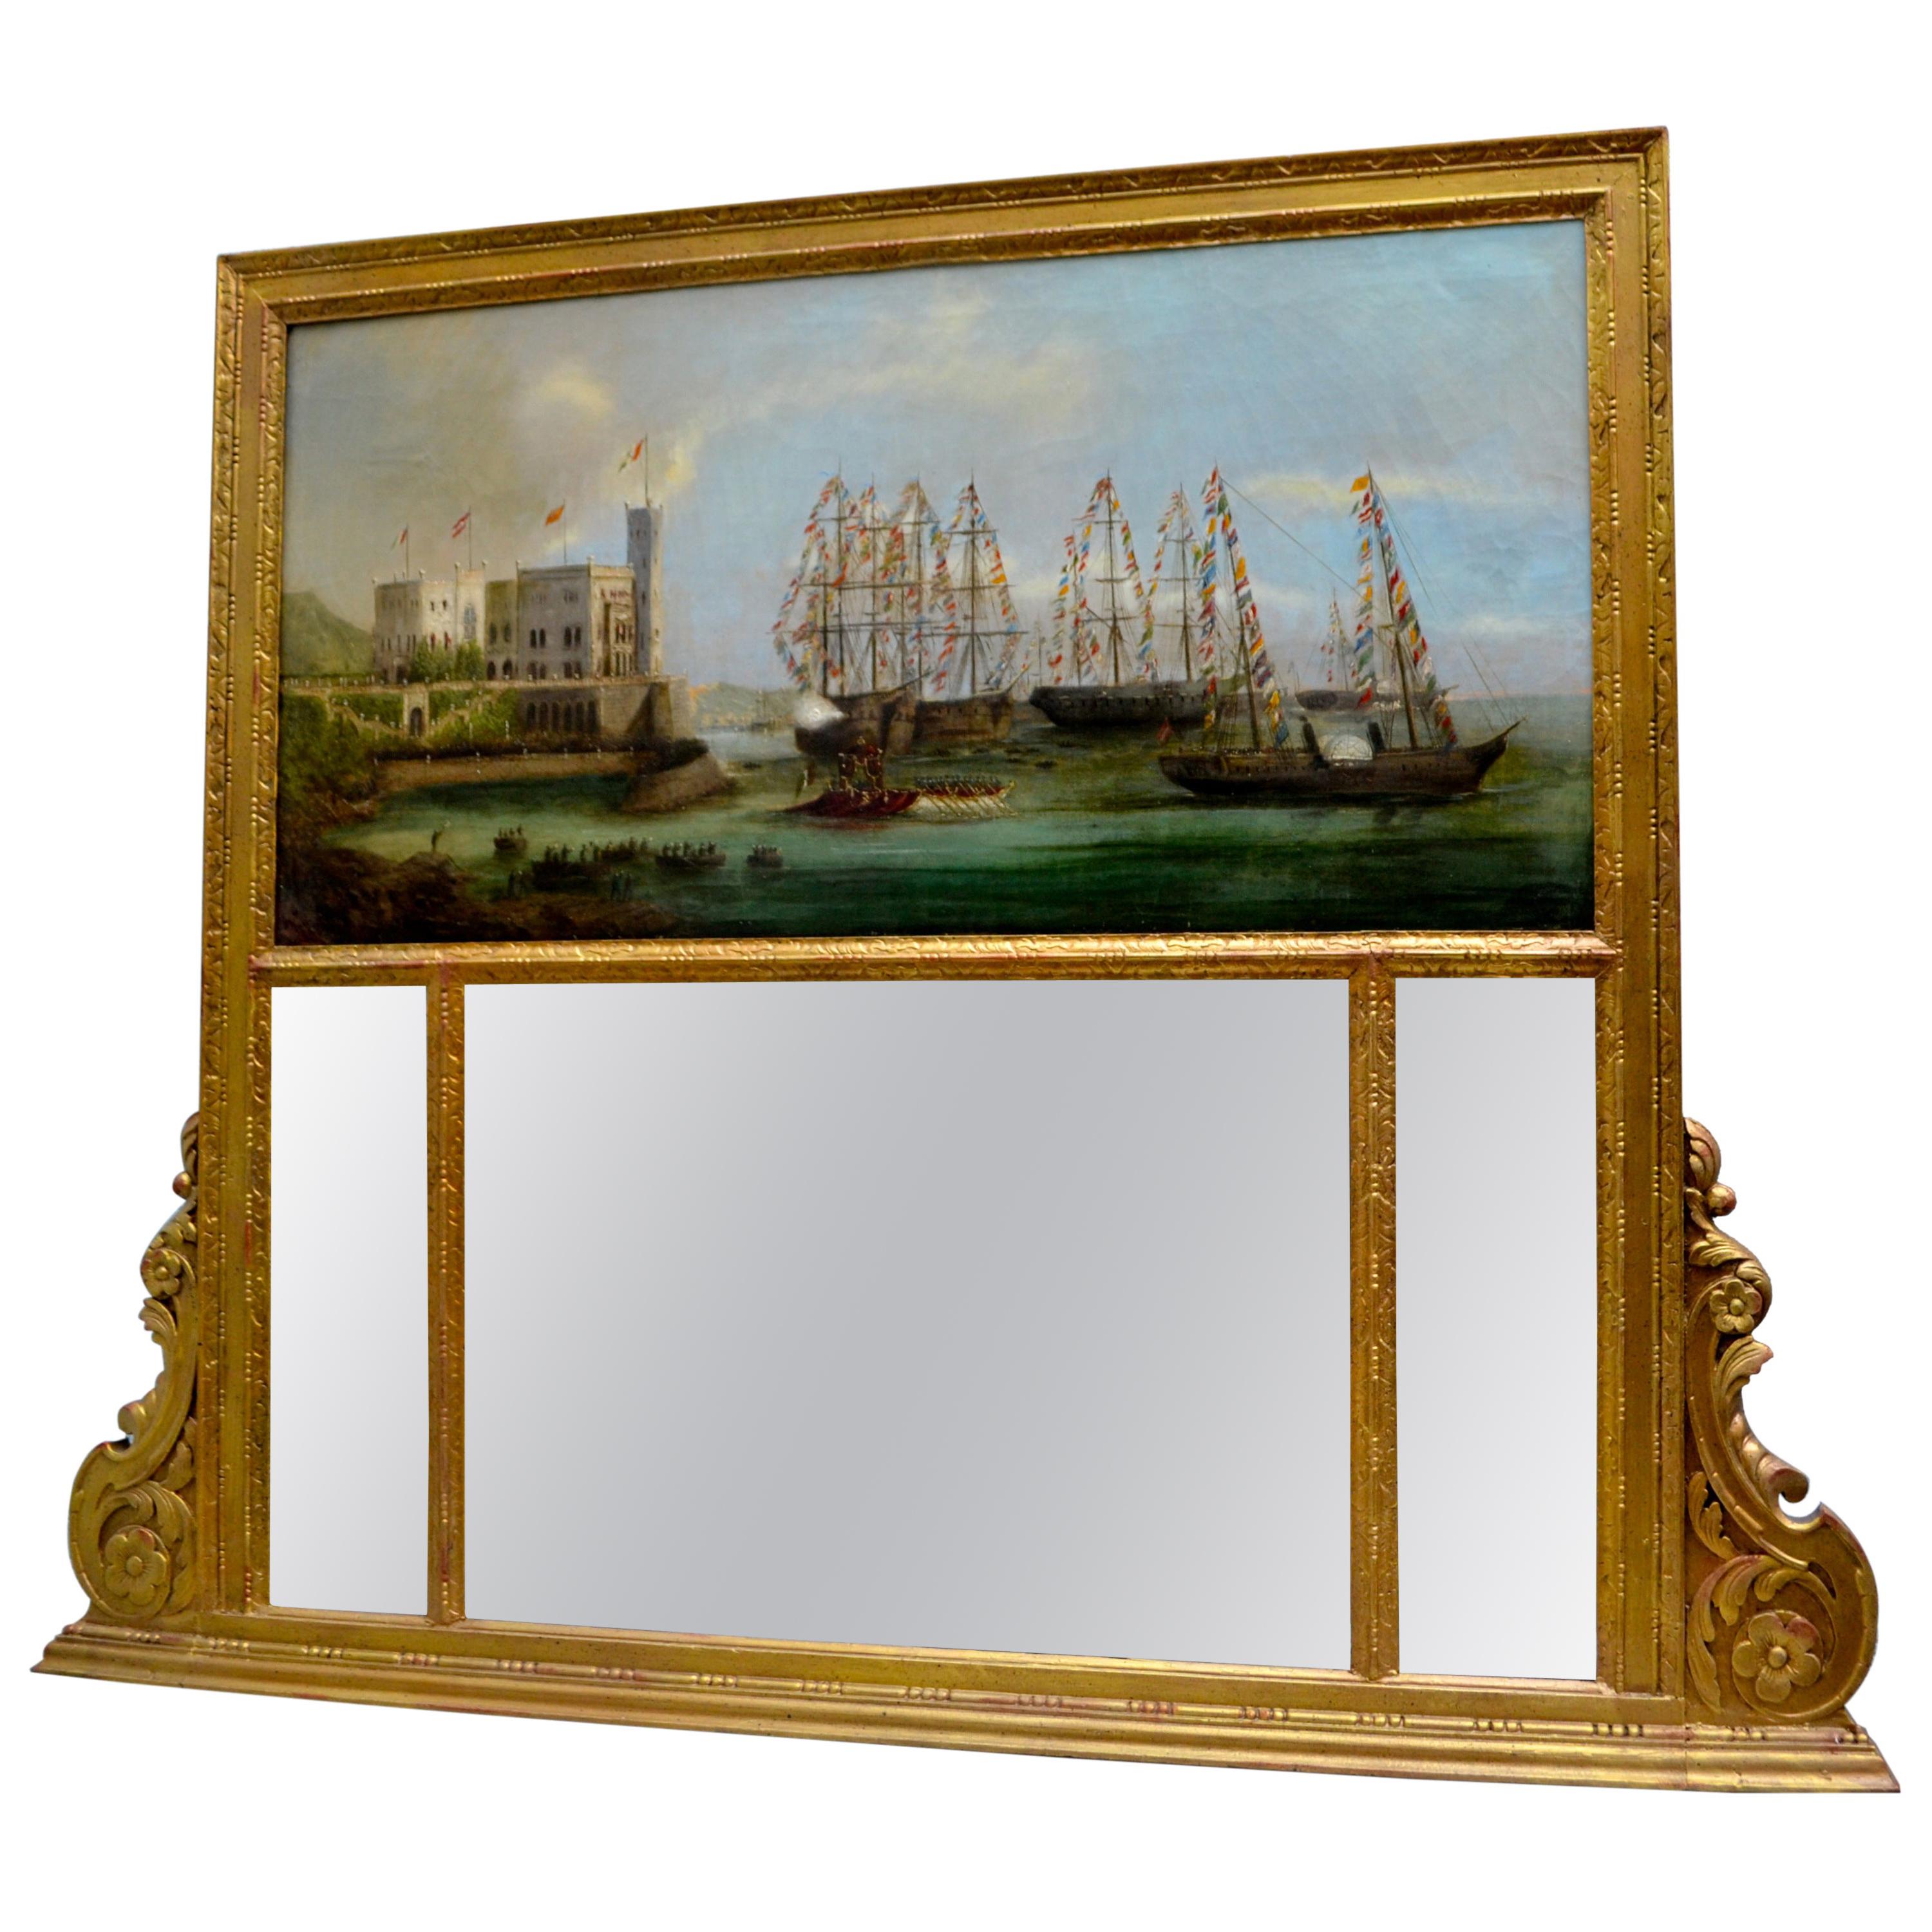  Trumeau Mirror and Painting of a Hapsburg Wedding at Miramare Castle in Trieste